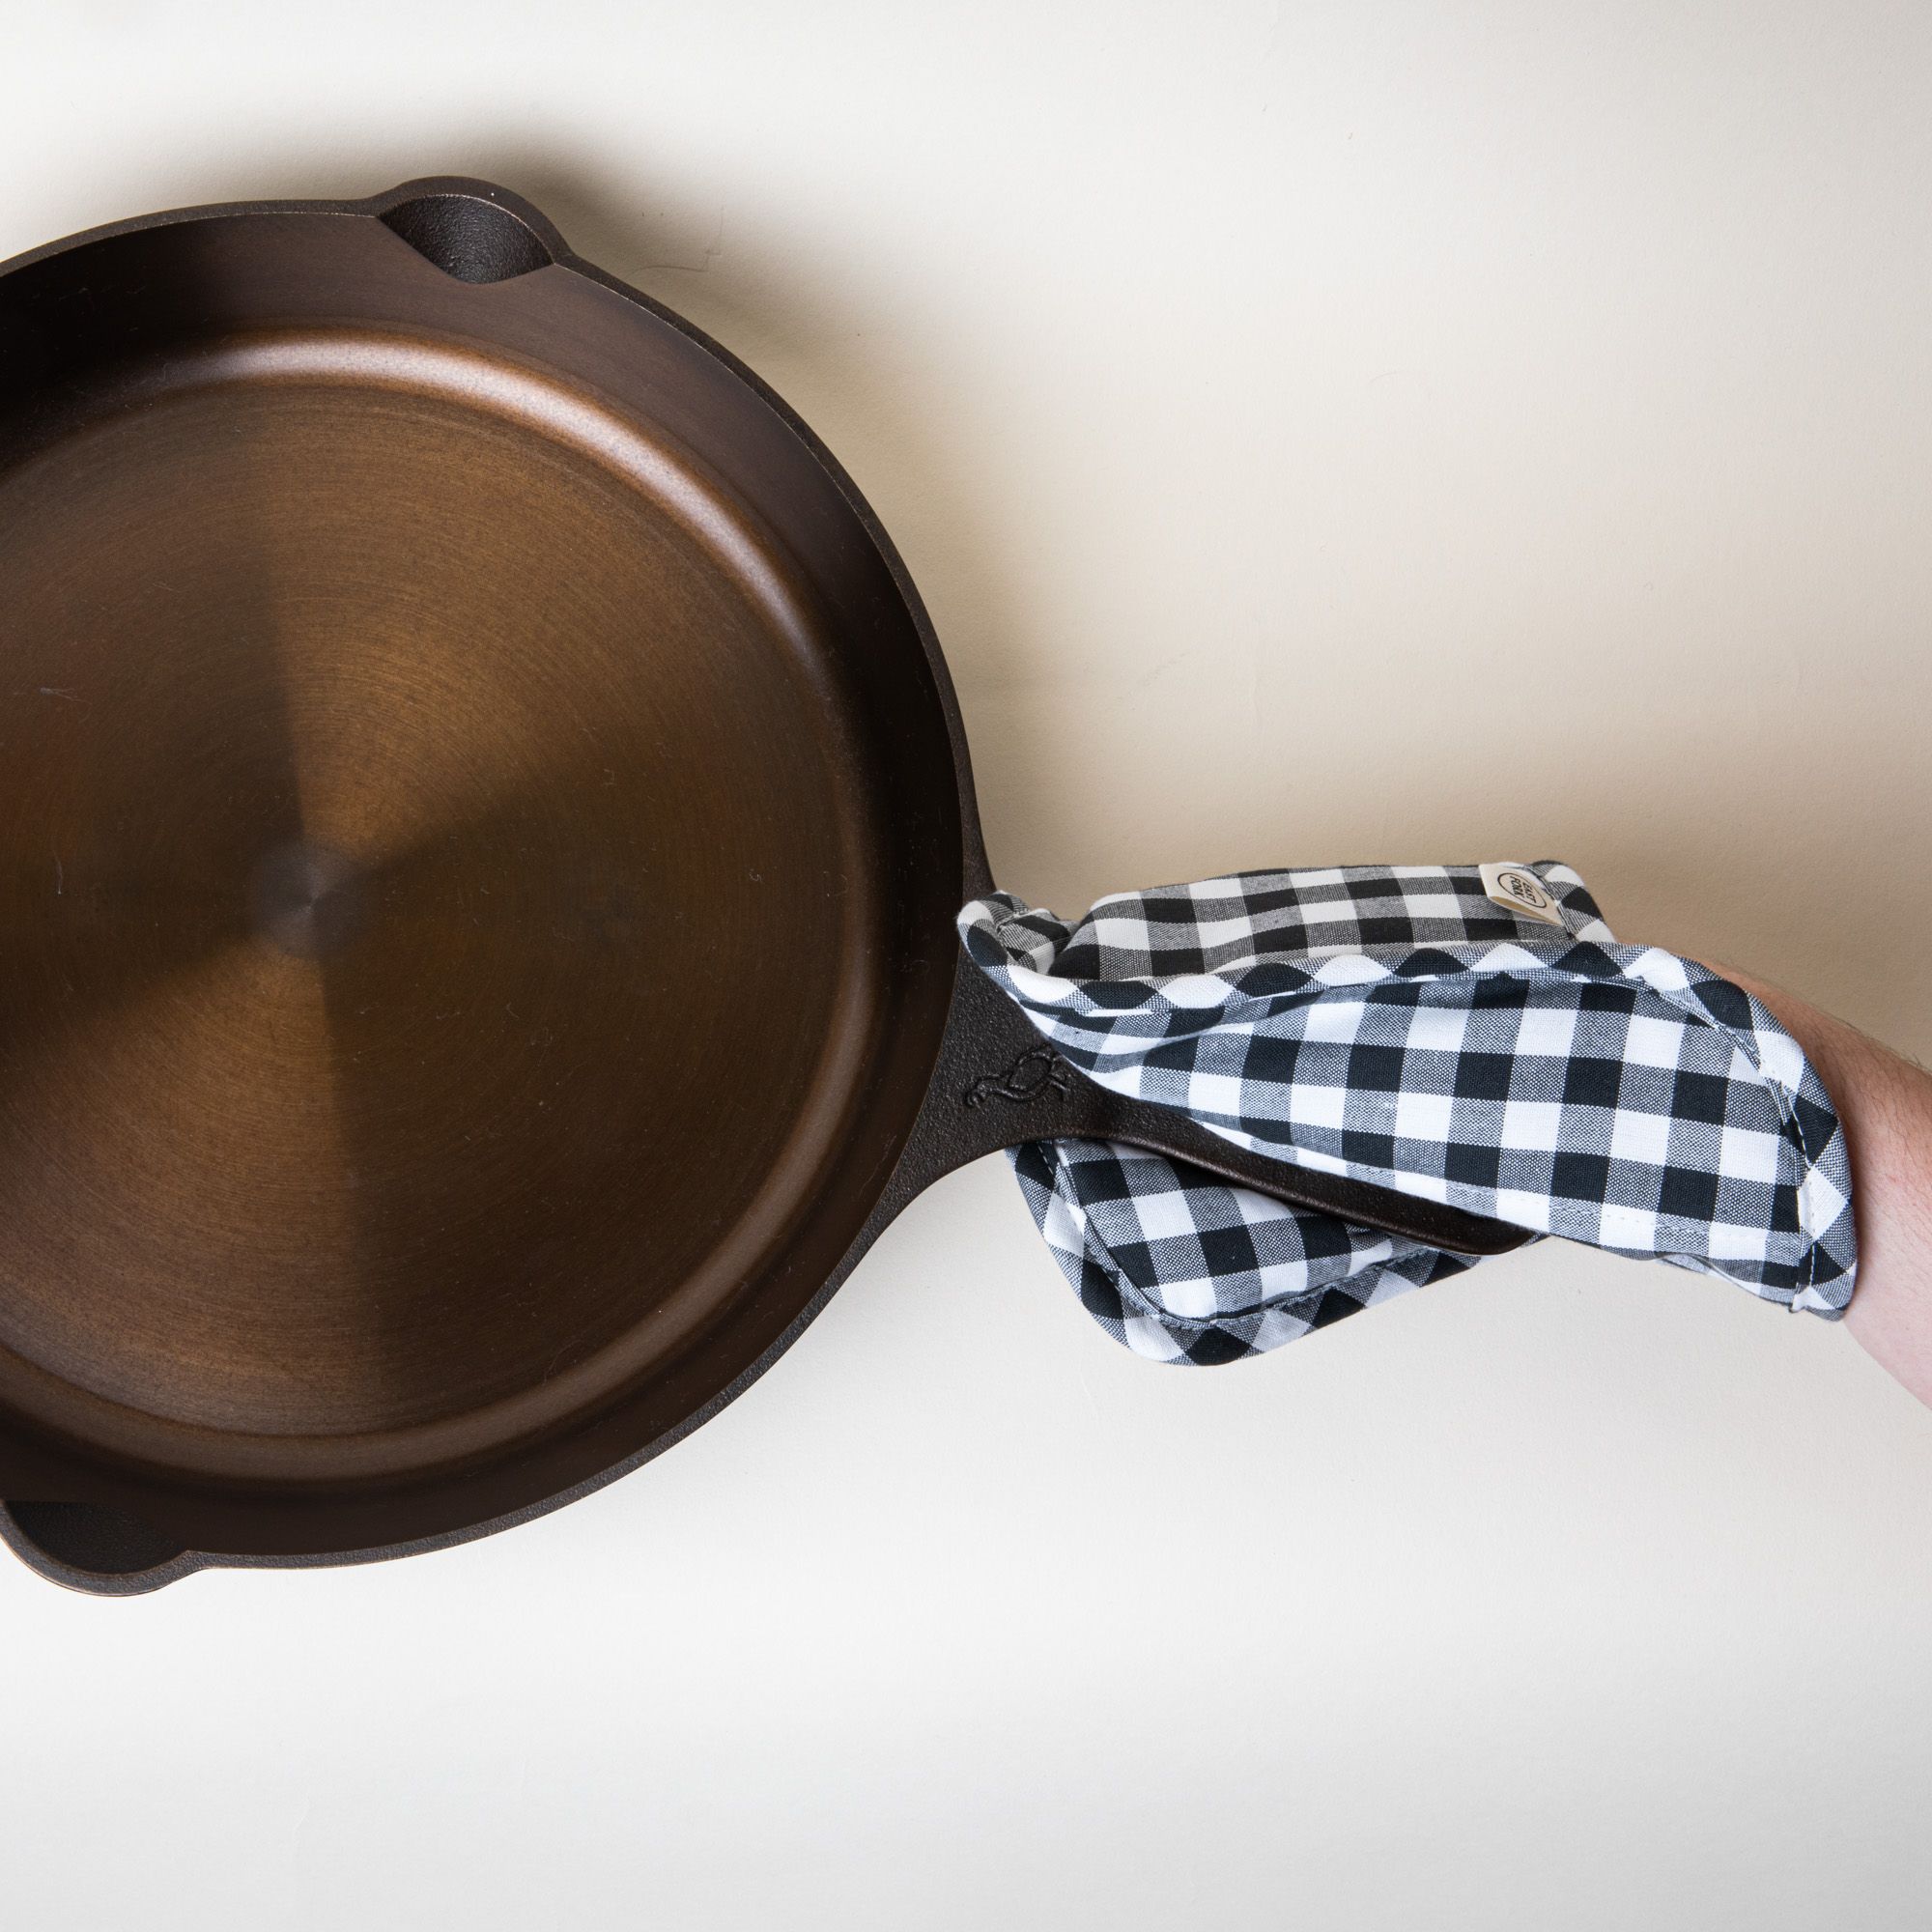 A skillet being held by a hand wearing a black and white gingham pot holder